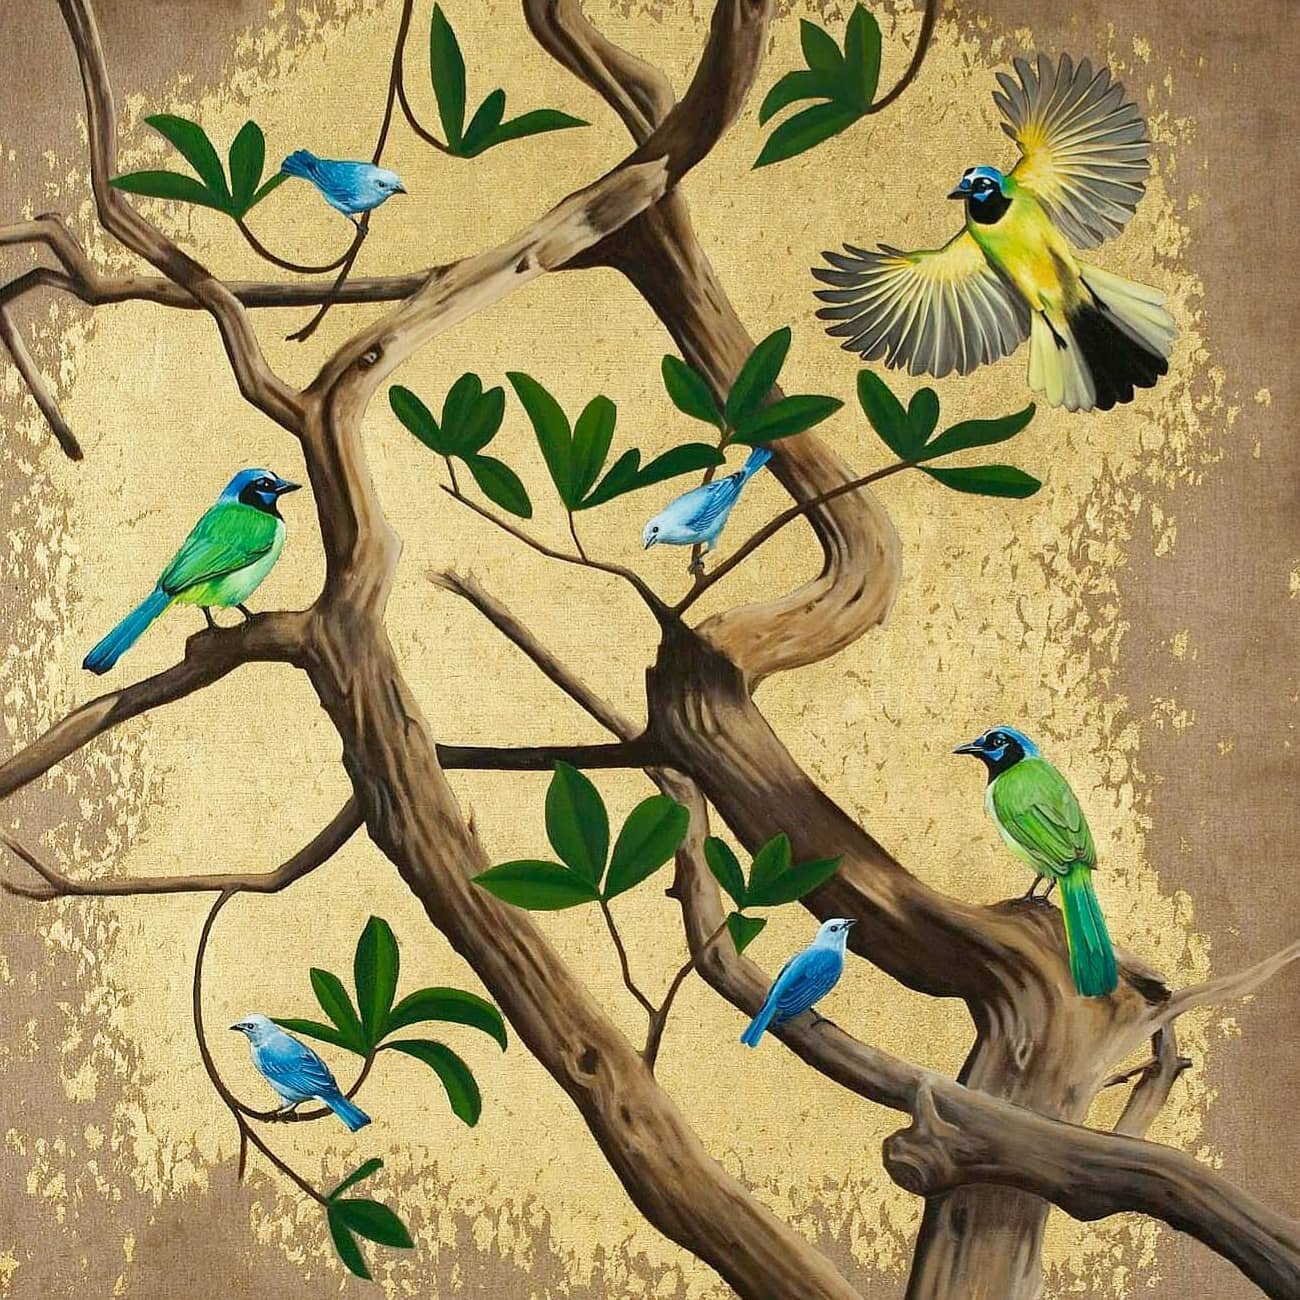 Continuing the gold series this is 'Green Jays and Tanagers' 120 x 120 cm oil and gold leaf on linen.
Available as a limited edition giclee print.

#art #painting #oilpainting #oils #originalart #wildlifeart #wildlifeartist #natureart #birdart #birds